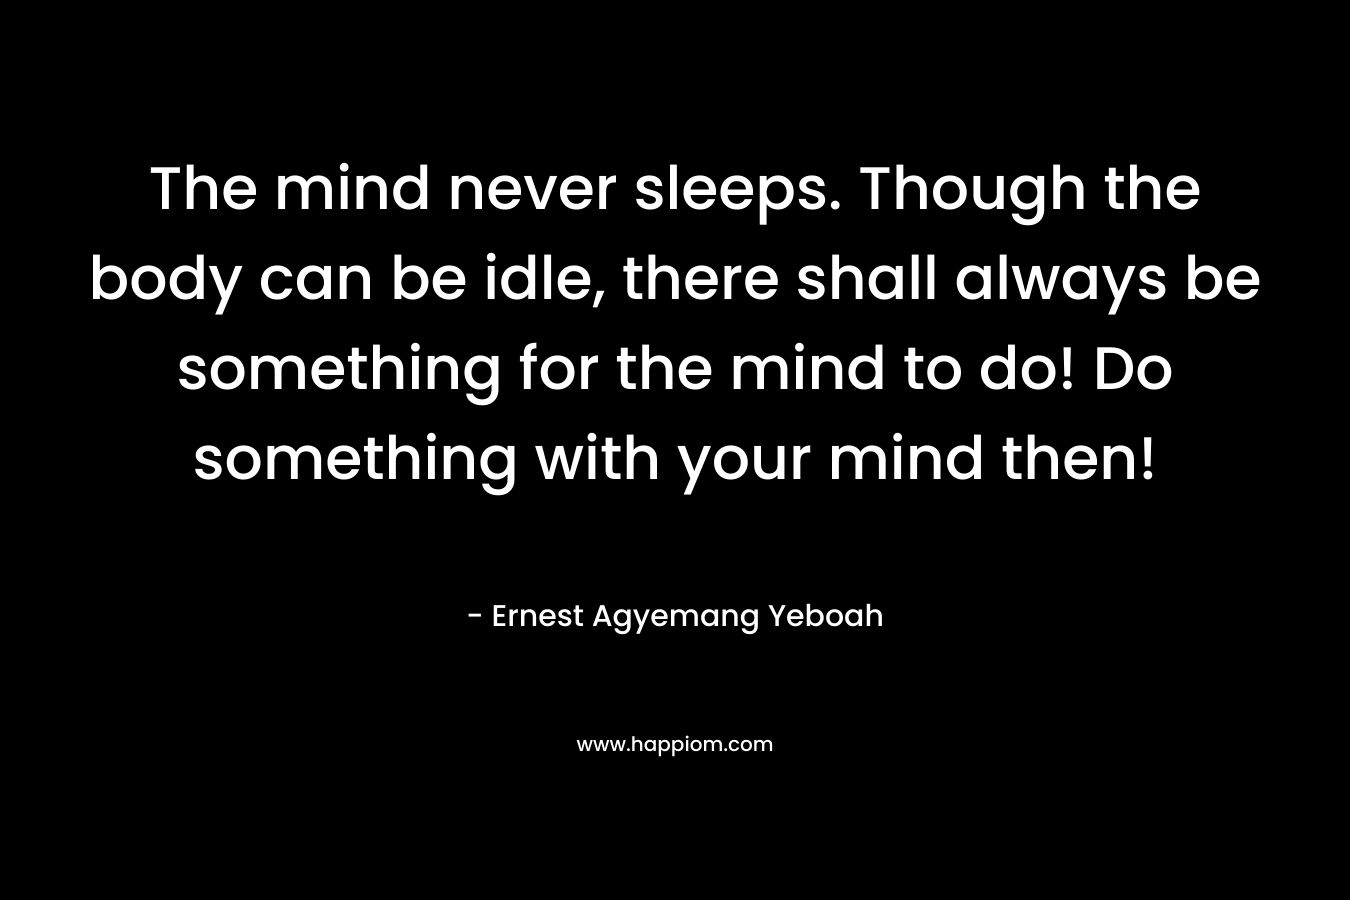 The mind never sleeps. Though the body can be idle, there shall always be something for the mind to do! Do something with your mind then!